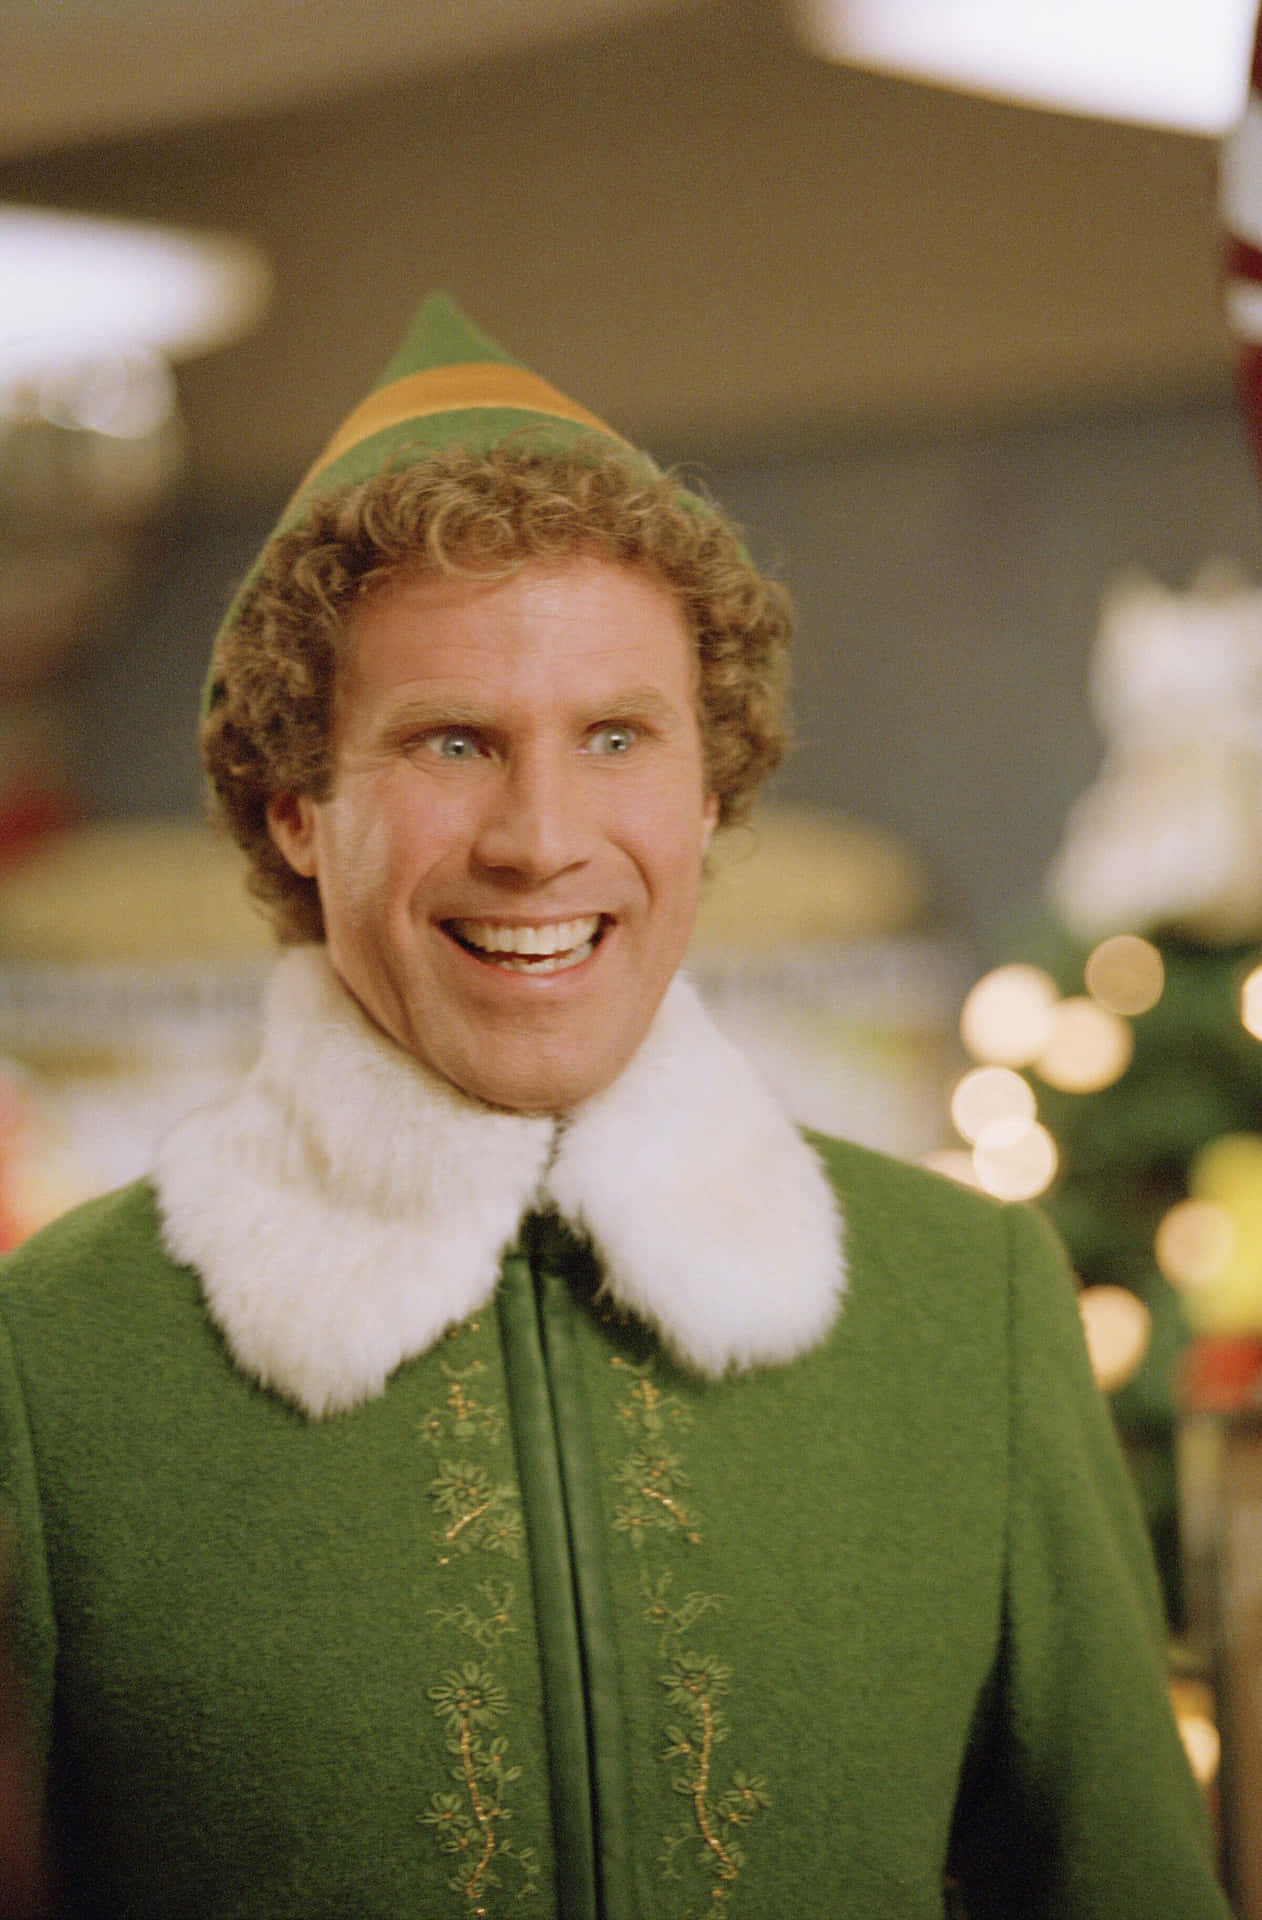 Chase your dreams and spread Christmas joy like Buddy the Elf Wallpaper